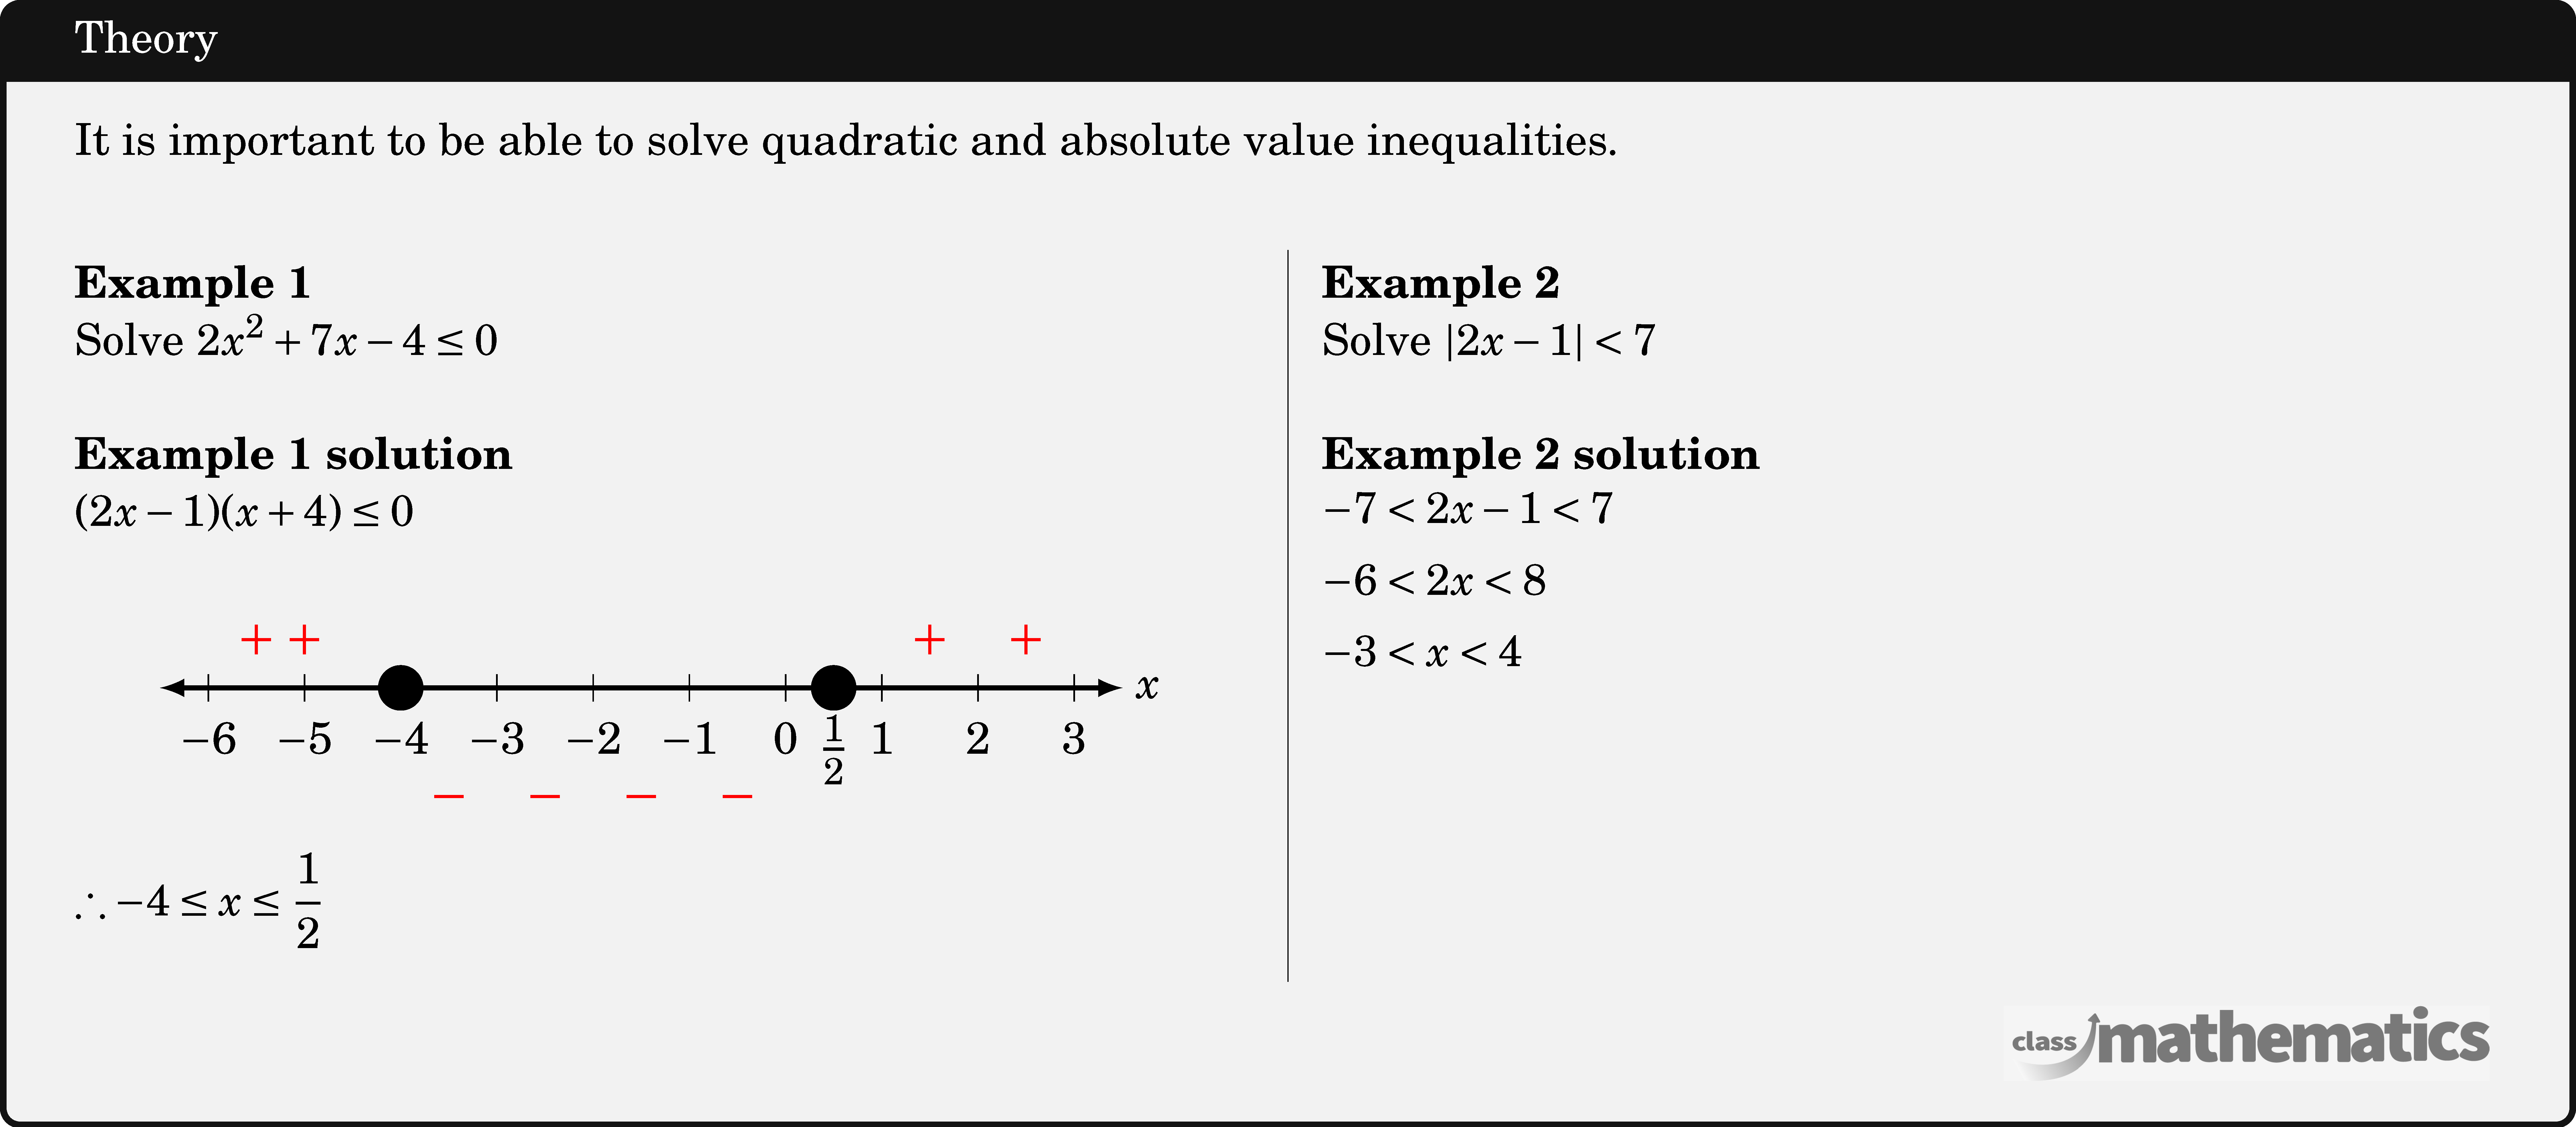 It is important to be able to solve quadratic and absolute value inequalities.\\  \begin{multicols}{2}  \textbf{Example 1}\\ Solve \(2 x^2+7 x-4 \leq 0\)\\  \textbf{Example 1 solution}\\ \((2 x-1)(x+4) \leq 0\)\\  \begin{center} \resizebox{3in}{!}{ \begin{tikzpicture} \def \xnegative{-6}   %negative x value range \def \xpositive{3}    %positive x value range \def \xy{\x}          %label x or y or any alphabet  \draw[latex-latex,line width=0.5mm] (\xnegative.5,0) -- (\xpositive.5,0) node[right] {\Large\(x\)}; \foreach \x in {\xnegative,...,\xpositive} \draw[thin] (\x,4pt )--(\x, -4pt ) node[below=3pt]{\Large\(\xy\)}; \draw[line width=2pt,fill=black] (-4,0) circle (0.2); \draw[line width=2pt,fill=black] (0.5,0) circle (0.2) node[below=4pt] {\LARGE \(\frac{1}{2}\)}; \node[red] at (-5,0.5) {\LARGE\(+\)}; \node[red] at (-5.5,0.5) {\LARGE\(+\)}; \node[red] at (-1.5,-1.2) {\LARGE\(-\)}; \node[red] at (-0.5,-1.2) {\LARGE\(-\)}; \node[red] at (-2.5,-1.2) {\LARGE\(-\)}; \node[red] at (-3.5,-1.2) {\LARGE\(-\)}; \node[red] at (2.5,0.5) {\LARGE\(+\)}; \node[red] at (1.5,0.5) {\LARGE\(+\)}; \end{tikzpicture} } %\includegraphics[width=0.3\textwidth]{Screenshot 2022-12-23 153116} \end{center}  \(\therefore-4 \leq x \leq \dfrac{1}{2}\)\\  \columnbreak \textbf{Example 2}\\ Solve \(|2 x-1|<7\)\\  \textbf{Example 2 solution}\\ $\begin{aligned} -7&<2 x-1<7 \\ -6&<2 x<8 \\ -3&<x<4 \end{aligned}$\\  \end{multicols}